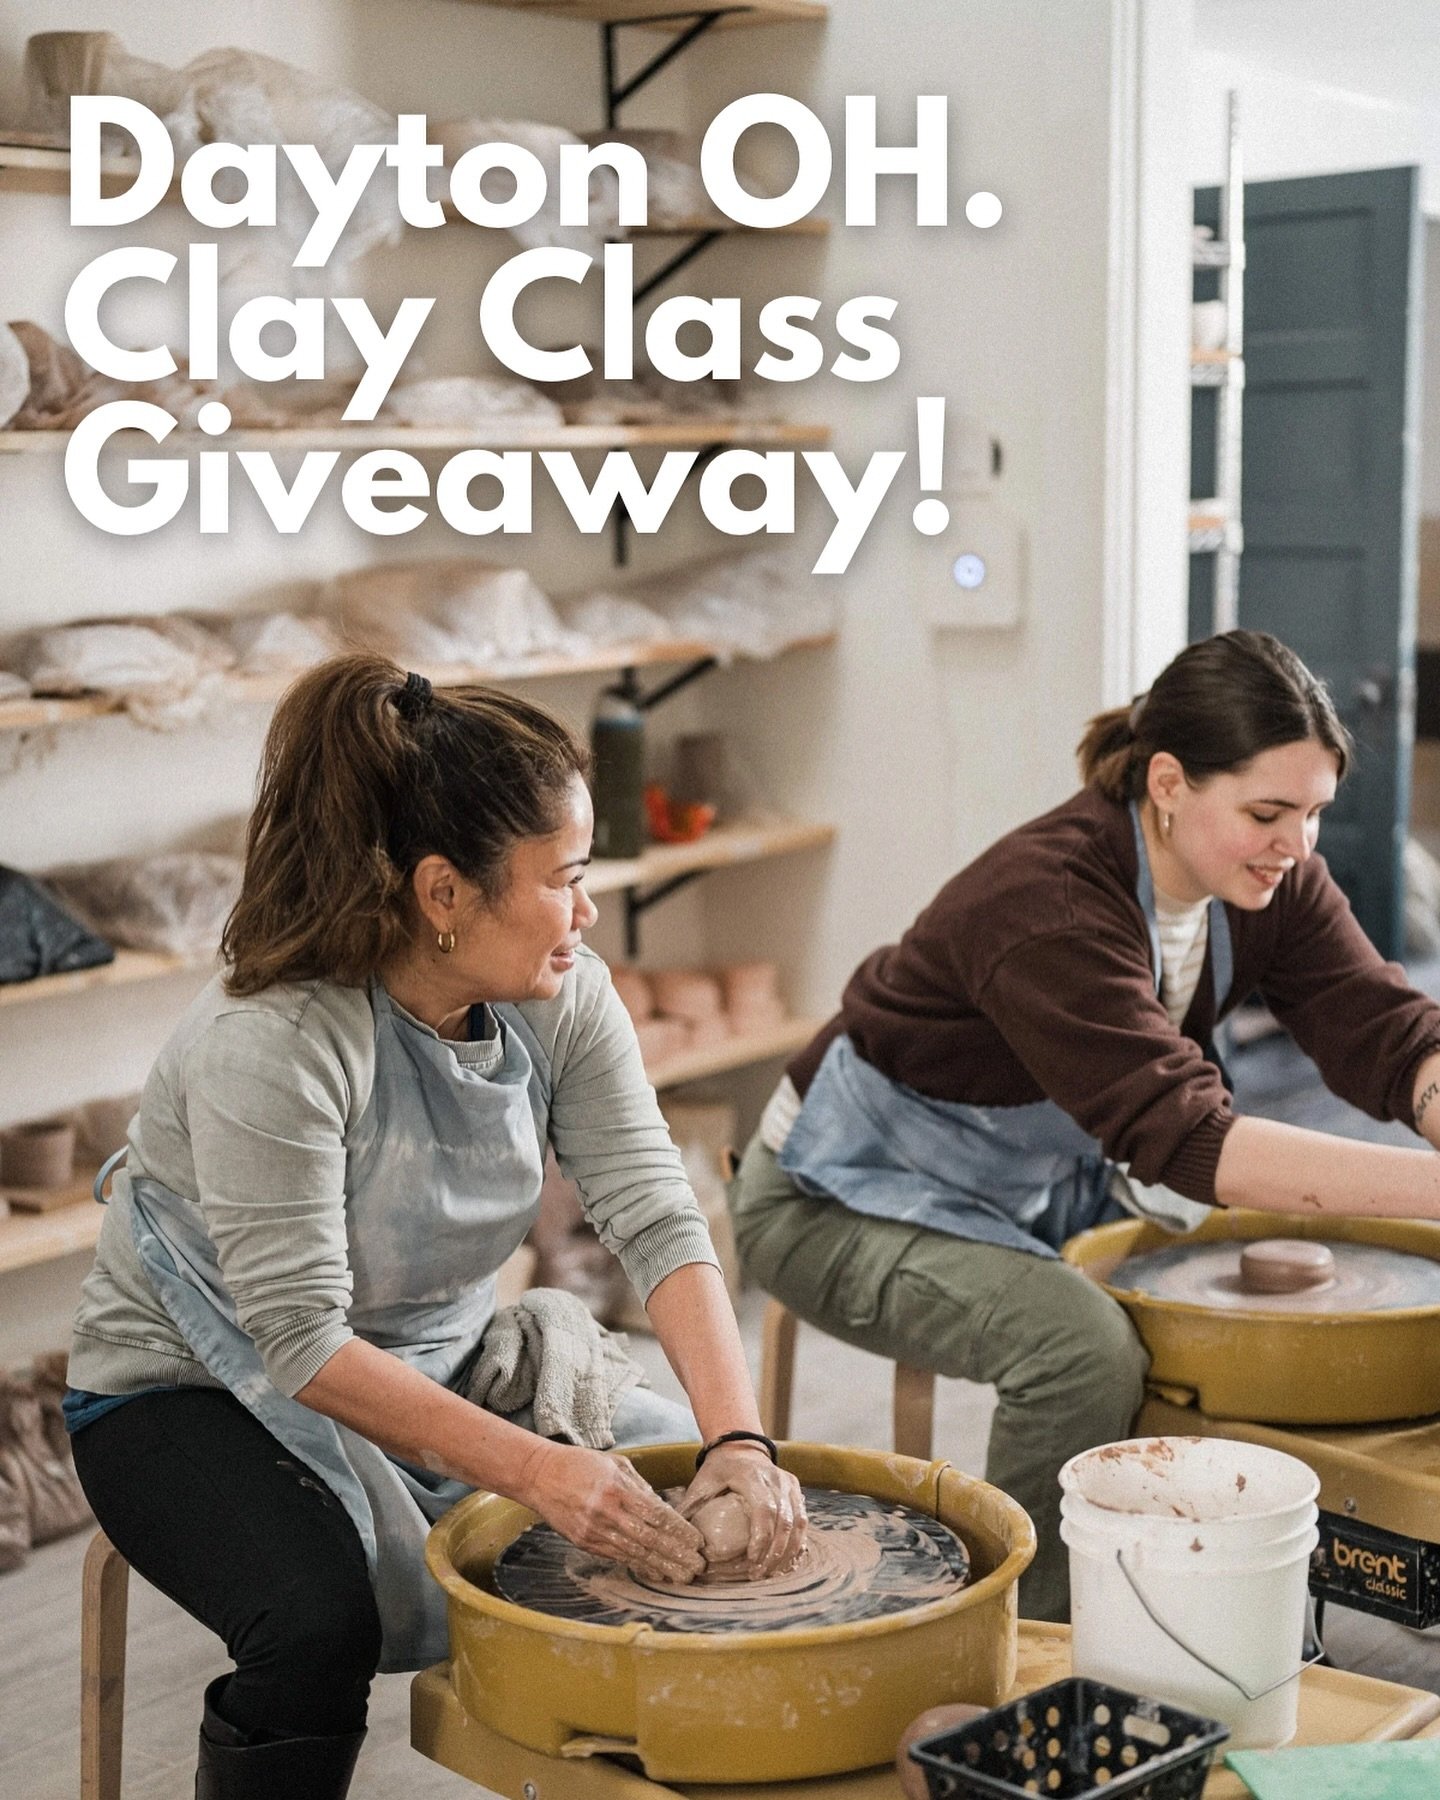 🎉 GIVEAWAY ALERT! 🎉 

We're celebrating! What are we celebrating? Nothing in particular, just feeling grateful for all of you and the space we have to CREATE! 

One lucky winner will receive a free wheel or hand building workshop of their choice! 
